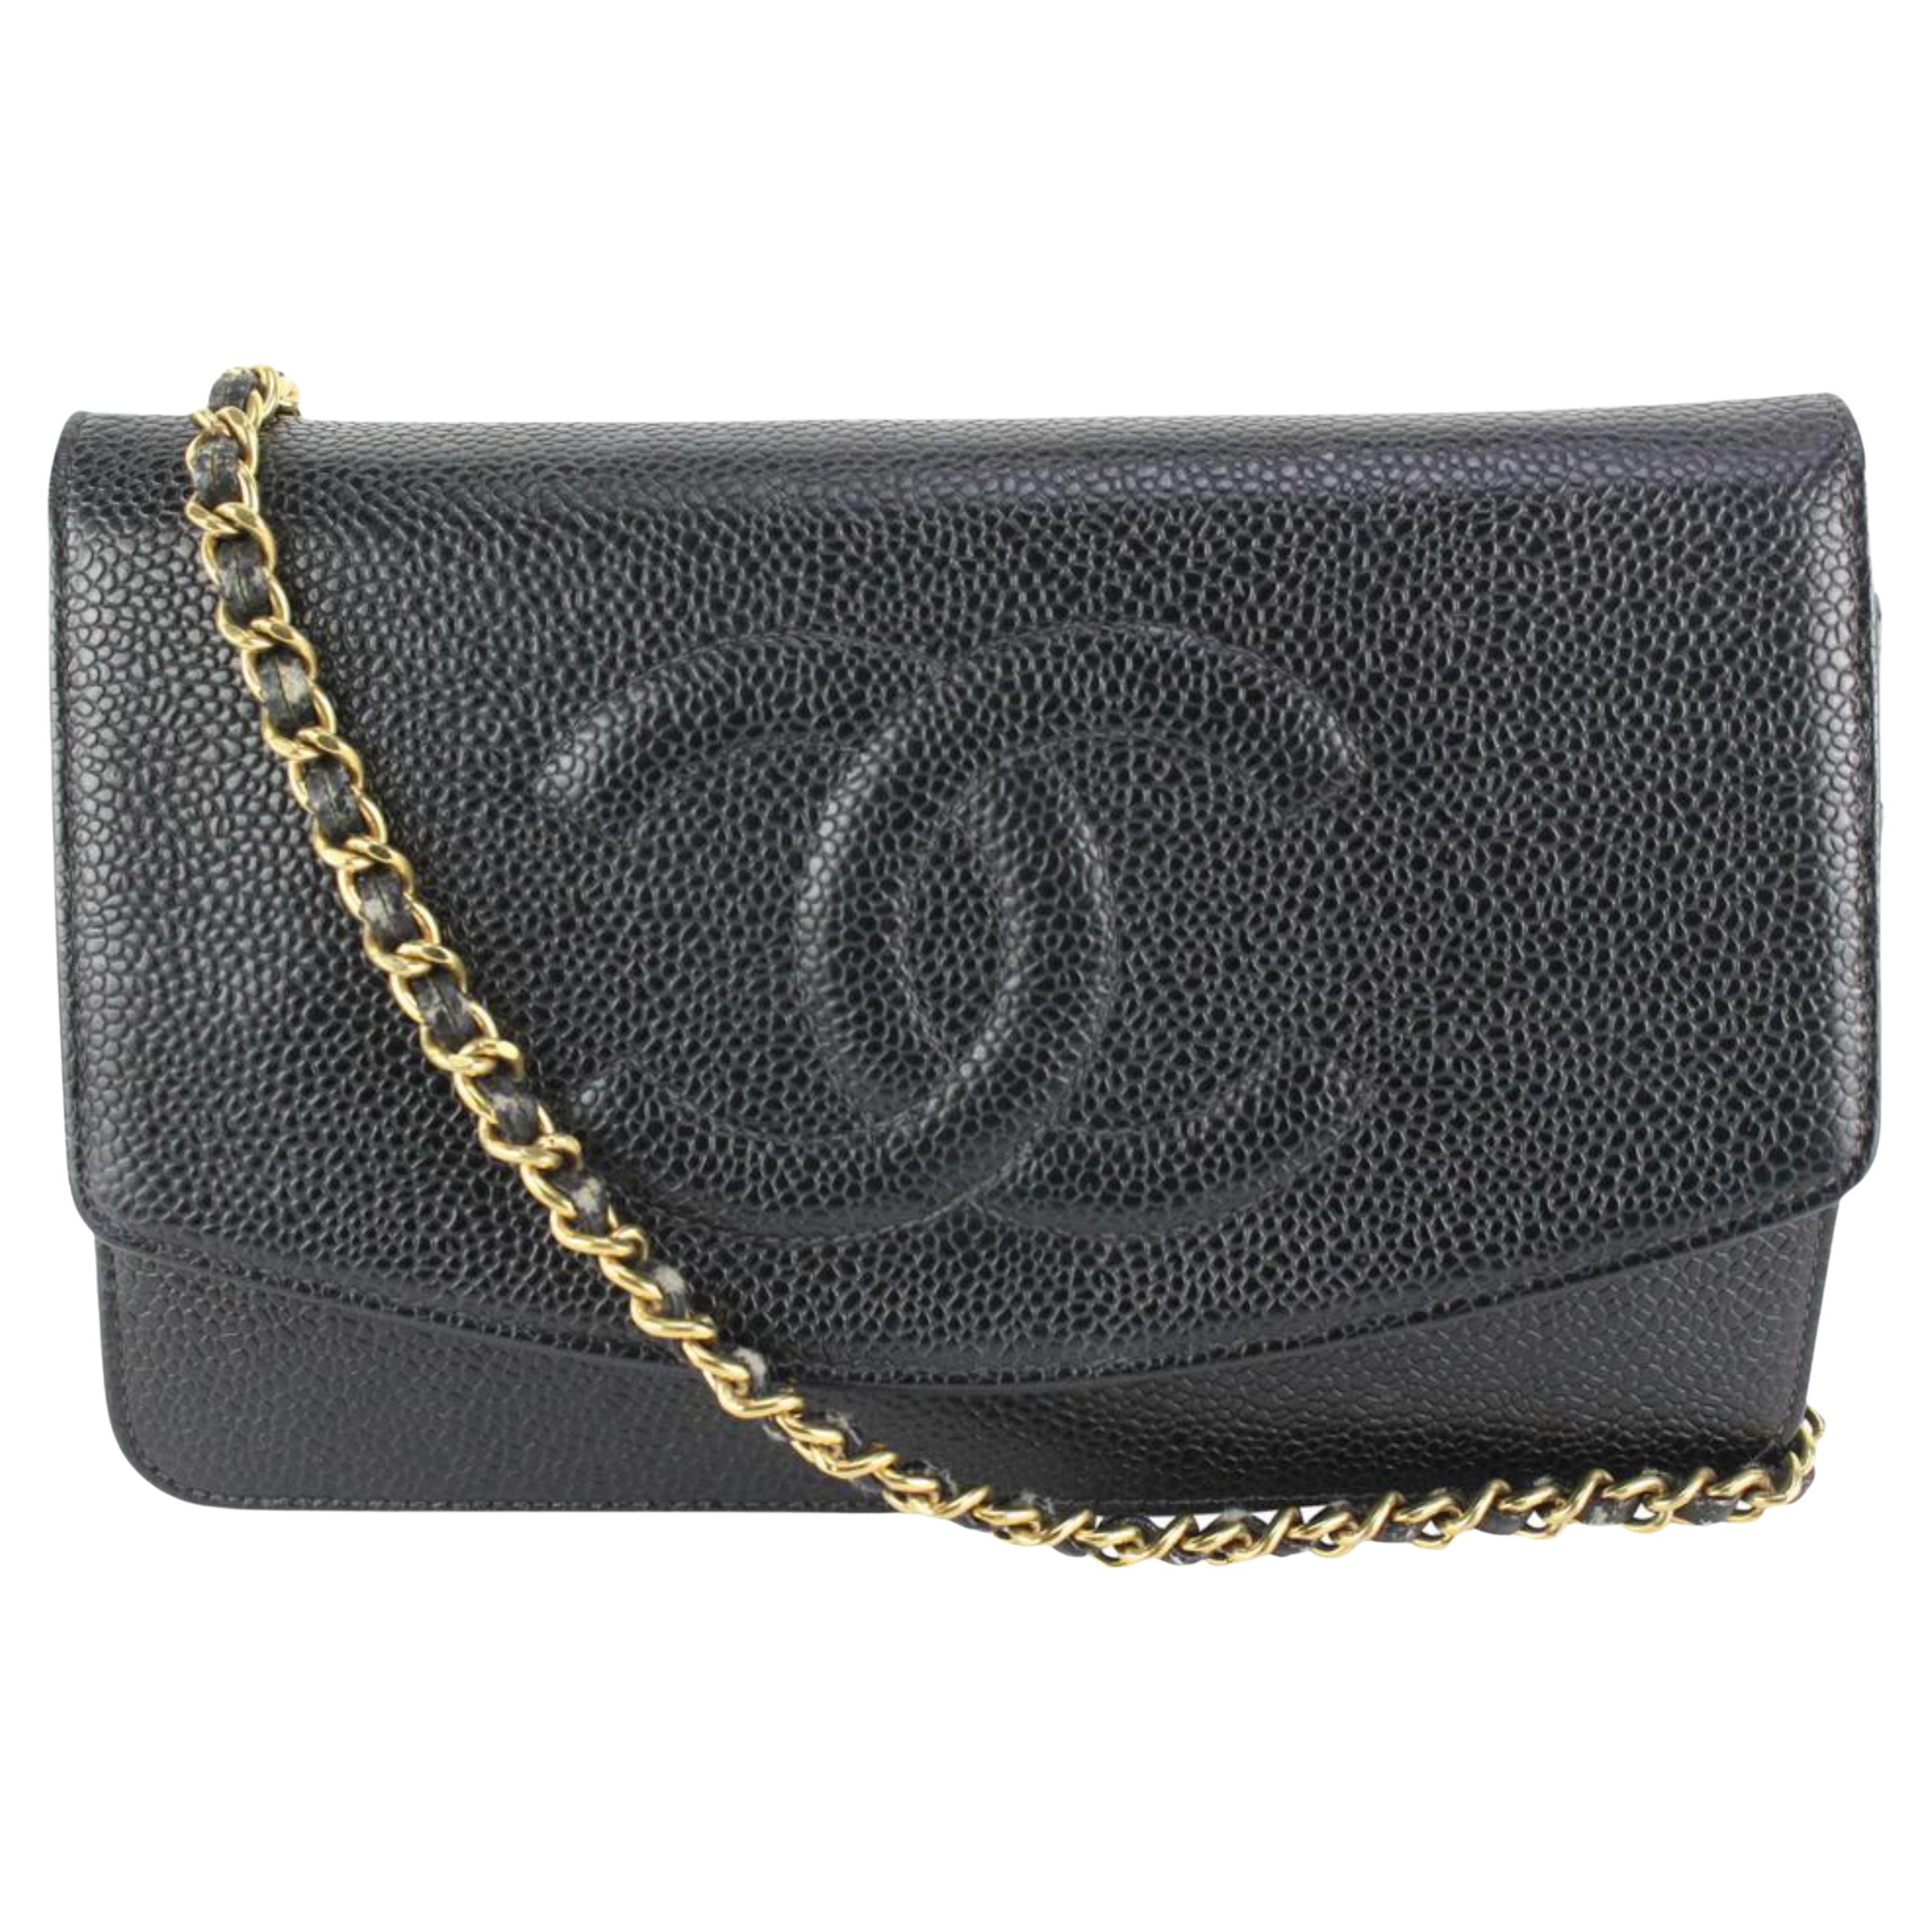 wallet on chain chanel trendy cc bag